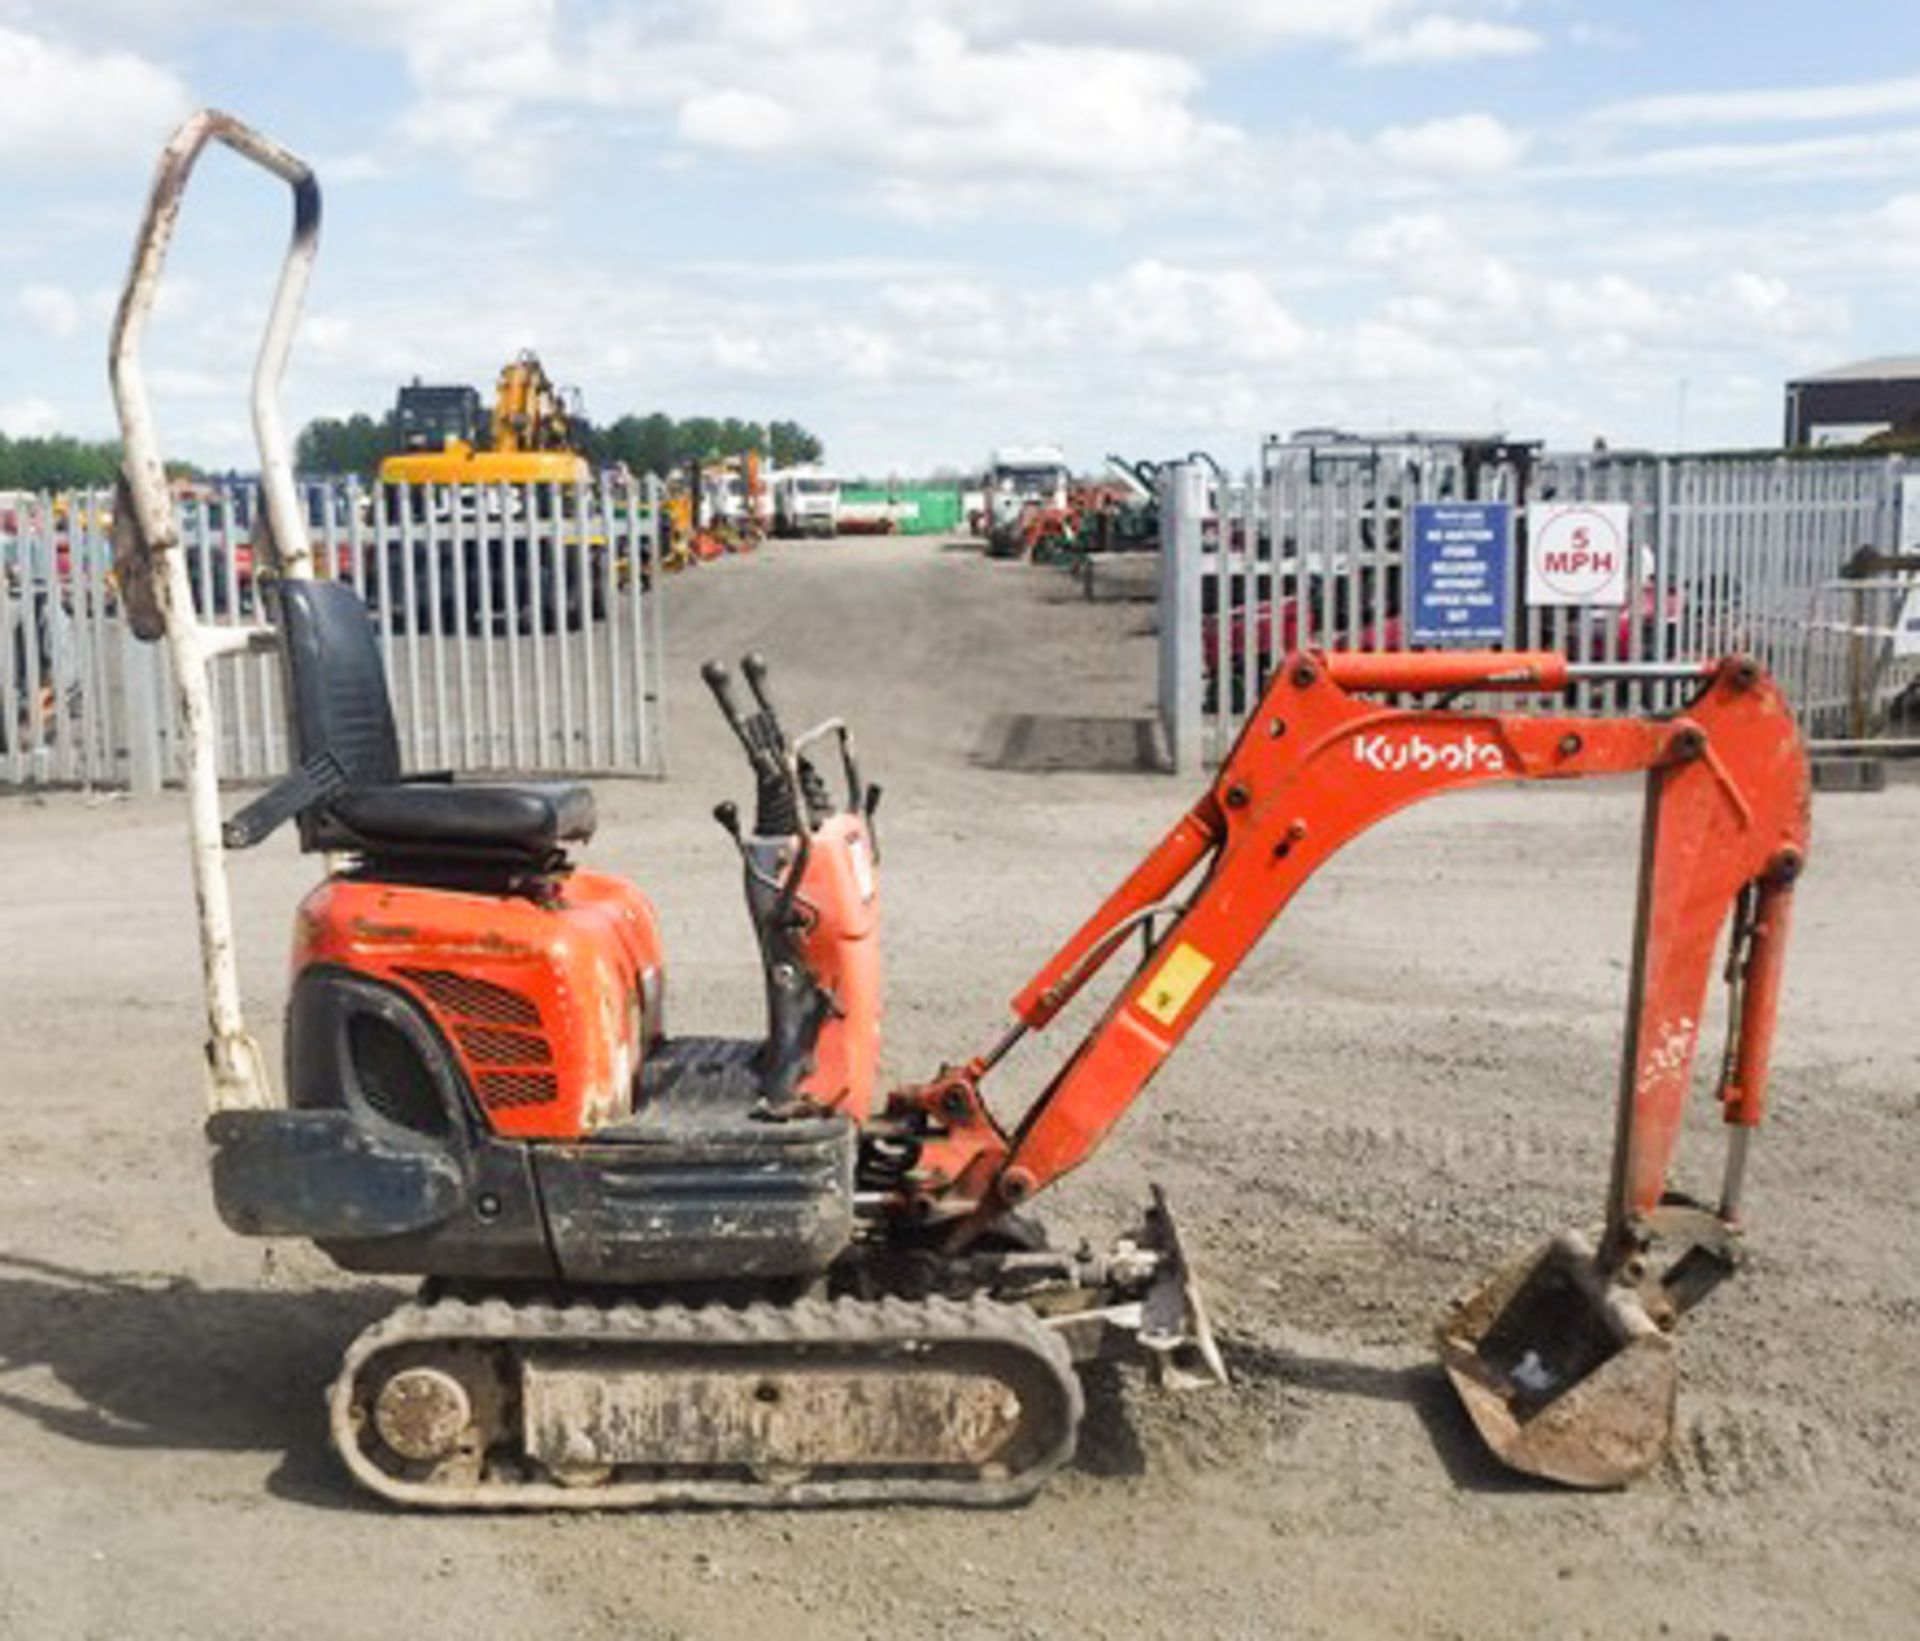 KUBOTA K008-3 ULTRA COMPACT EXCAVATOR C/W WITH BUCKET. SN12613. 3154 HRS. YEAR UNKNOWN - Image 4 of 18